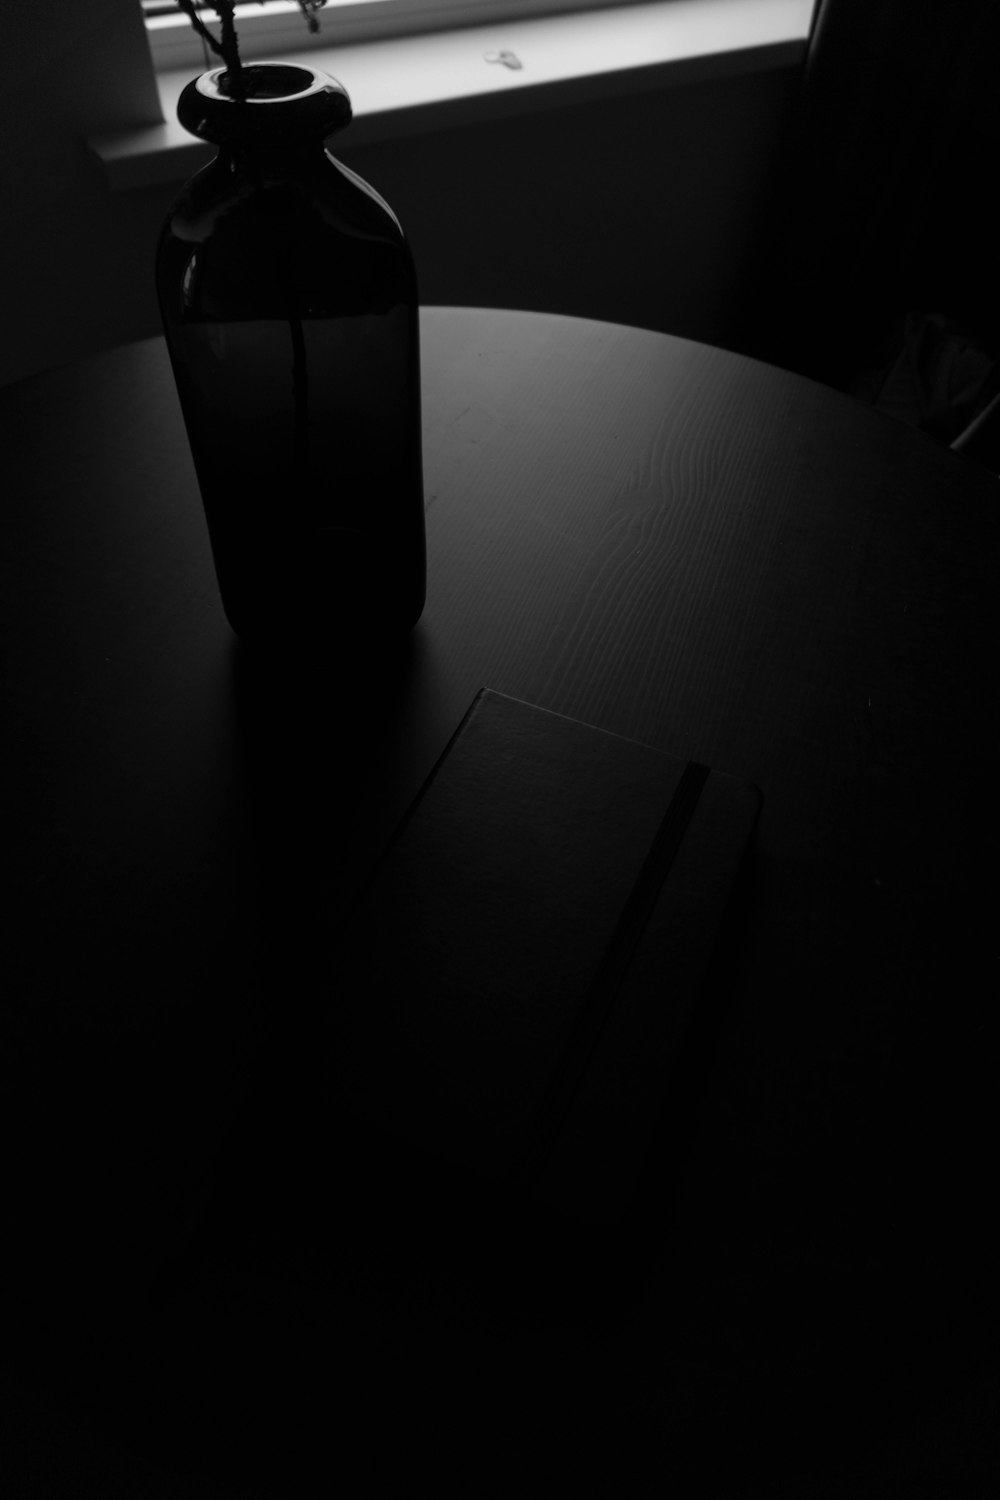 grayscale photography of bottle on table